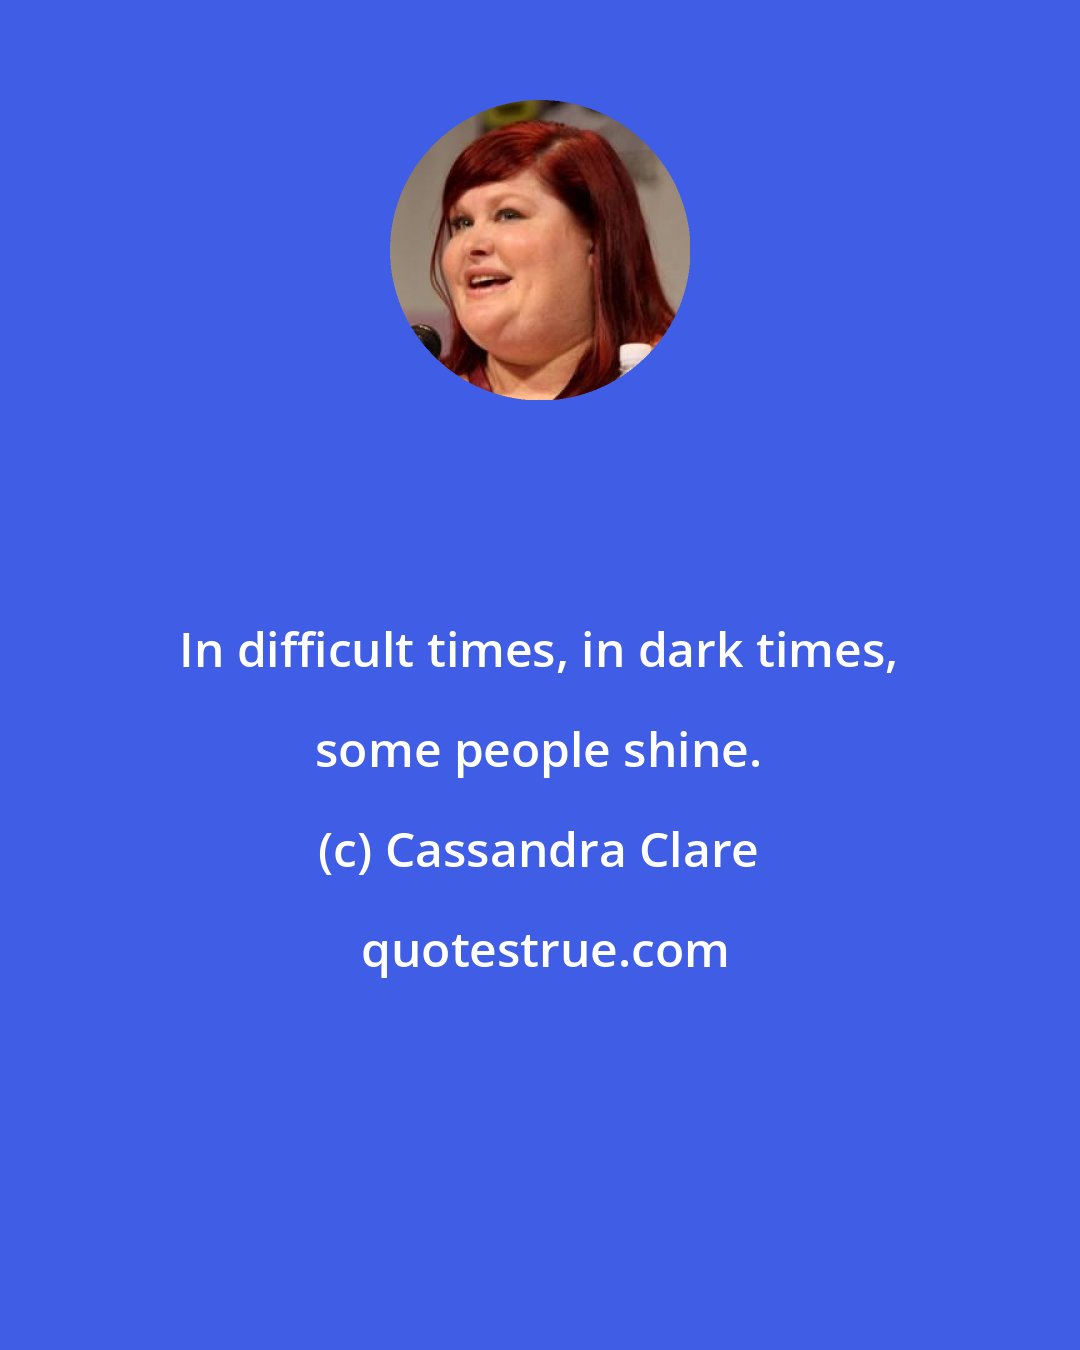 Cassandra Clare: In difficult times, in dark times, some people shine.